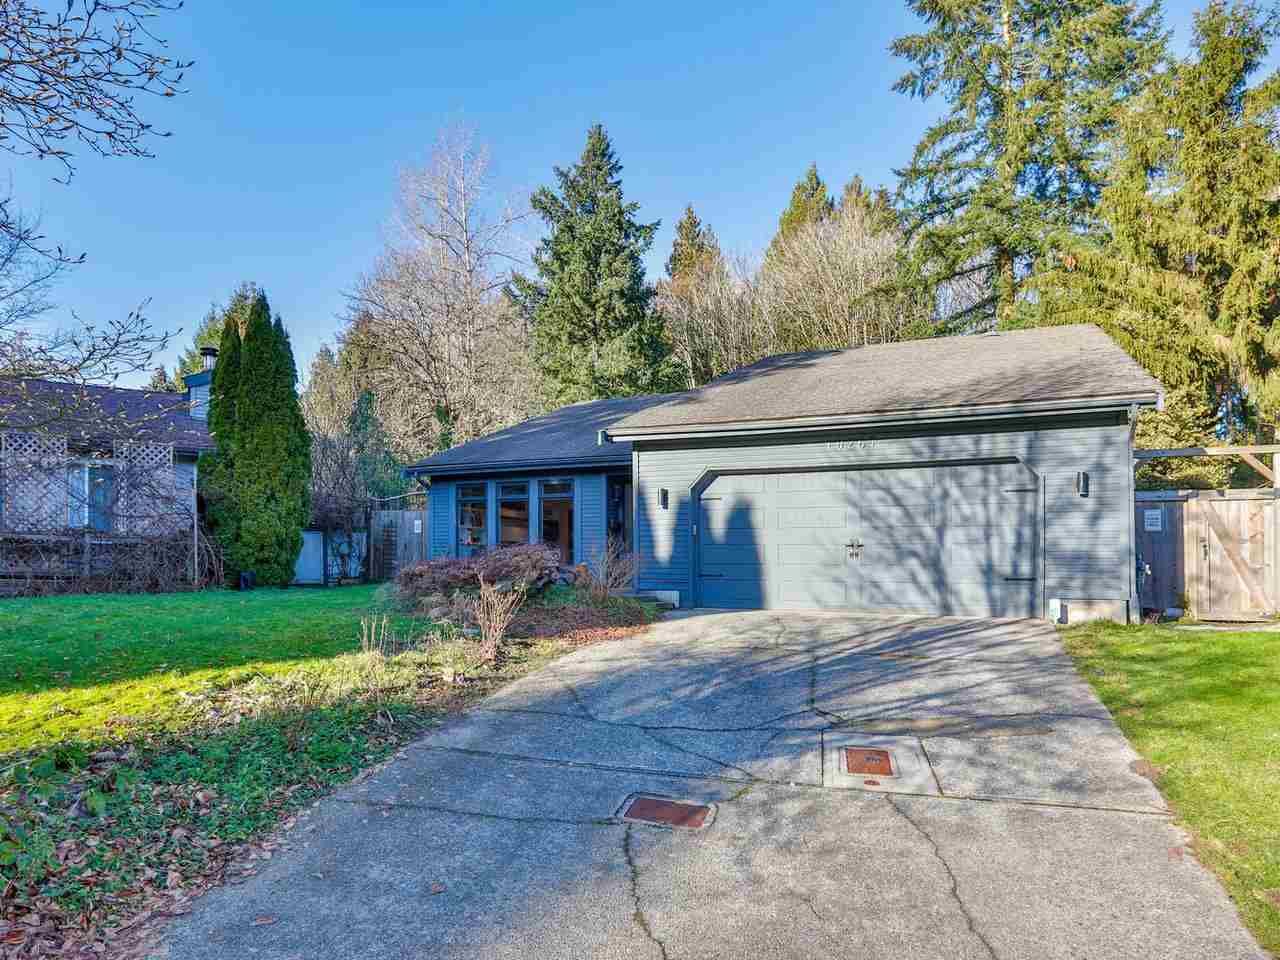 Main Photo: 10267 159A STREET in Surrey: Guildford House for sale (North Surrey)  : MLS®# R2528496